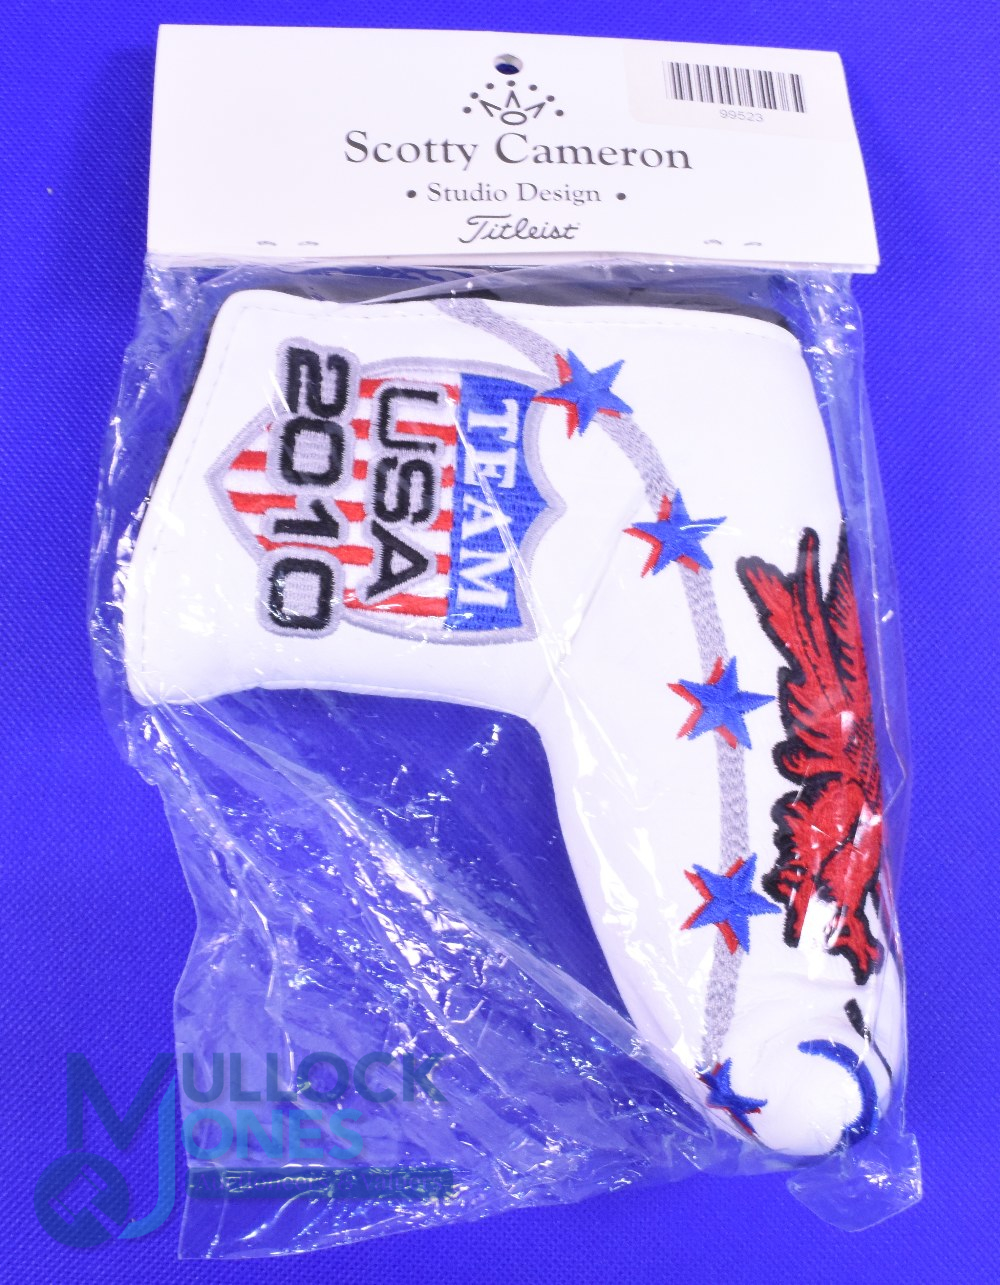 Scarce 2010 Scotty Cameron "Team USA (Ryder Cup)" leather embroidered putter head cover still in the - Image 2 of 2